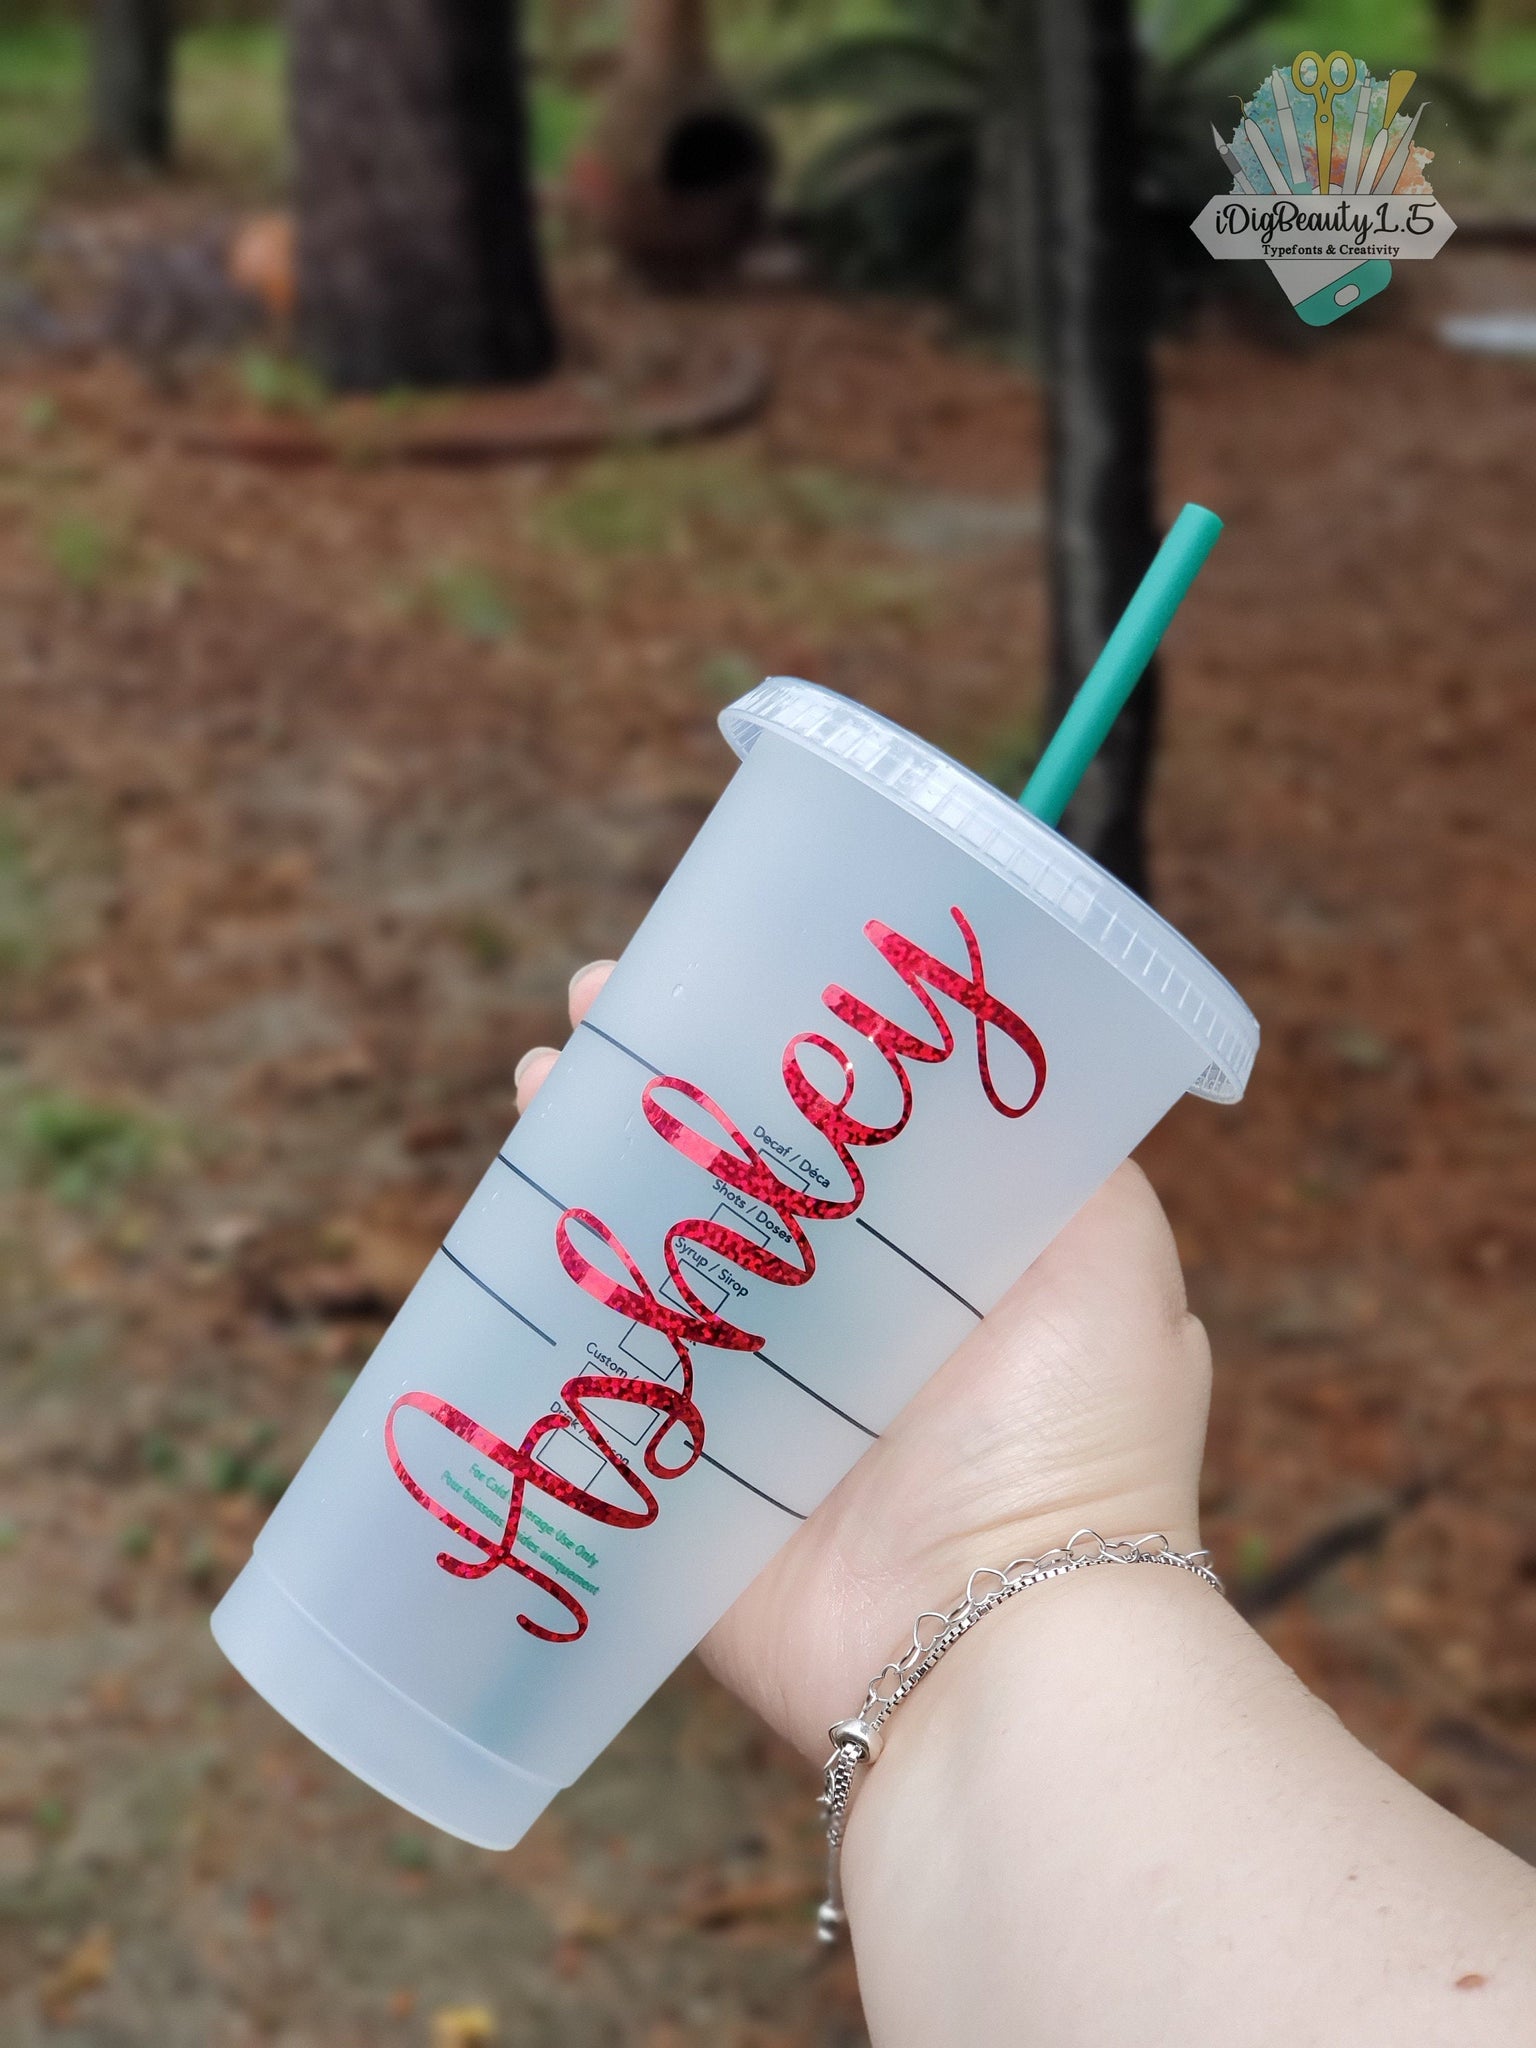 Butterfly Starbucks Cold Cup, Venti, Reusable Cold Cup